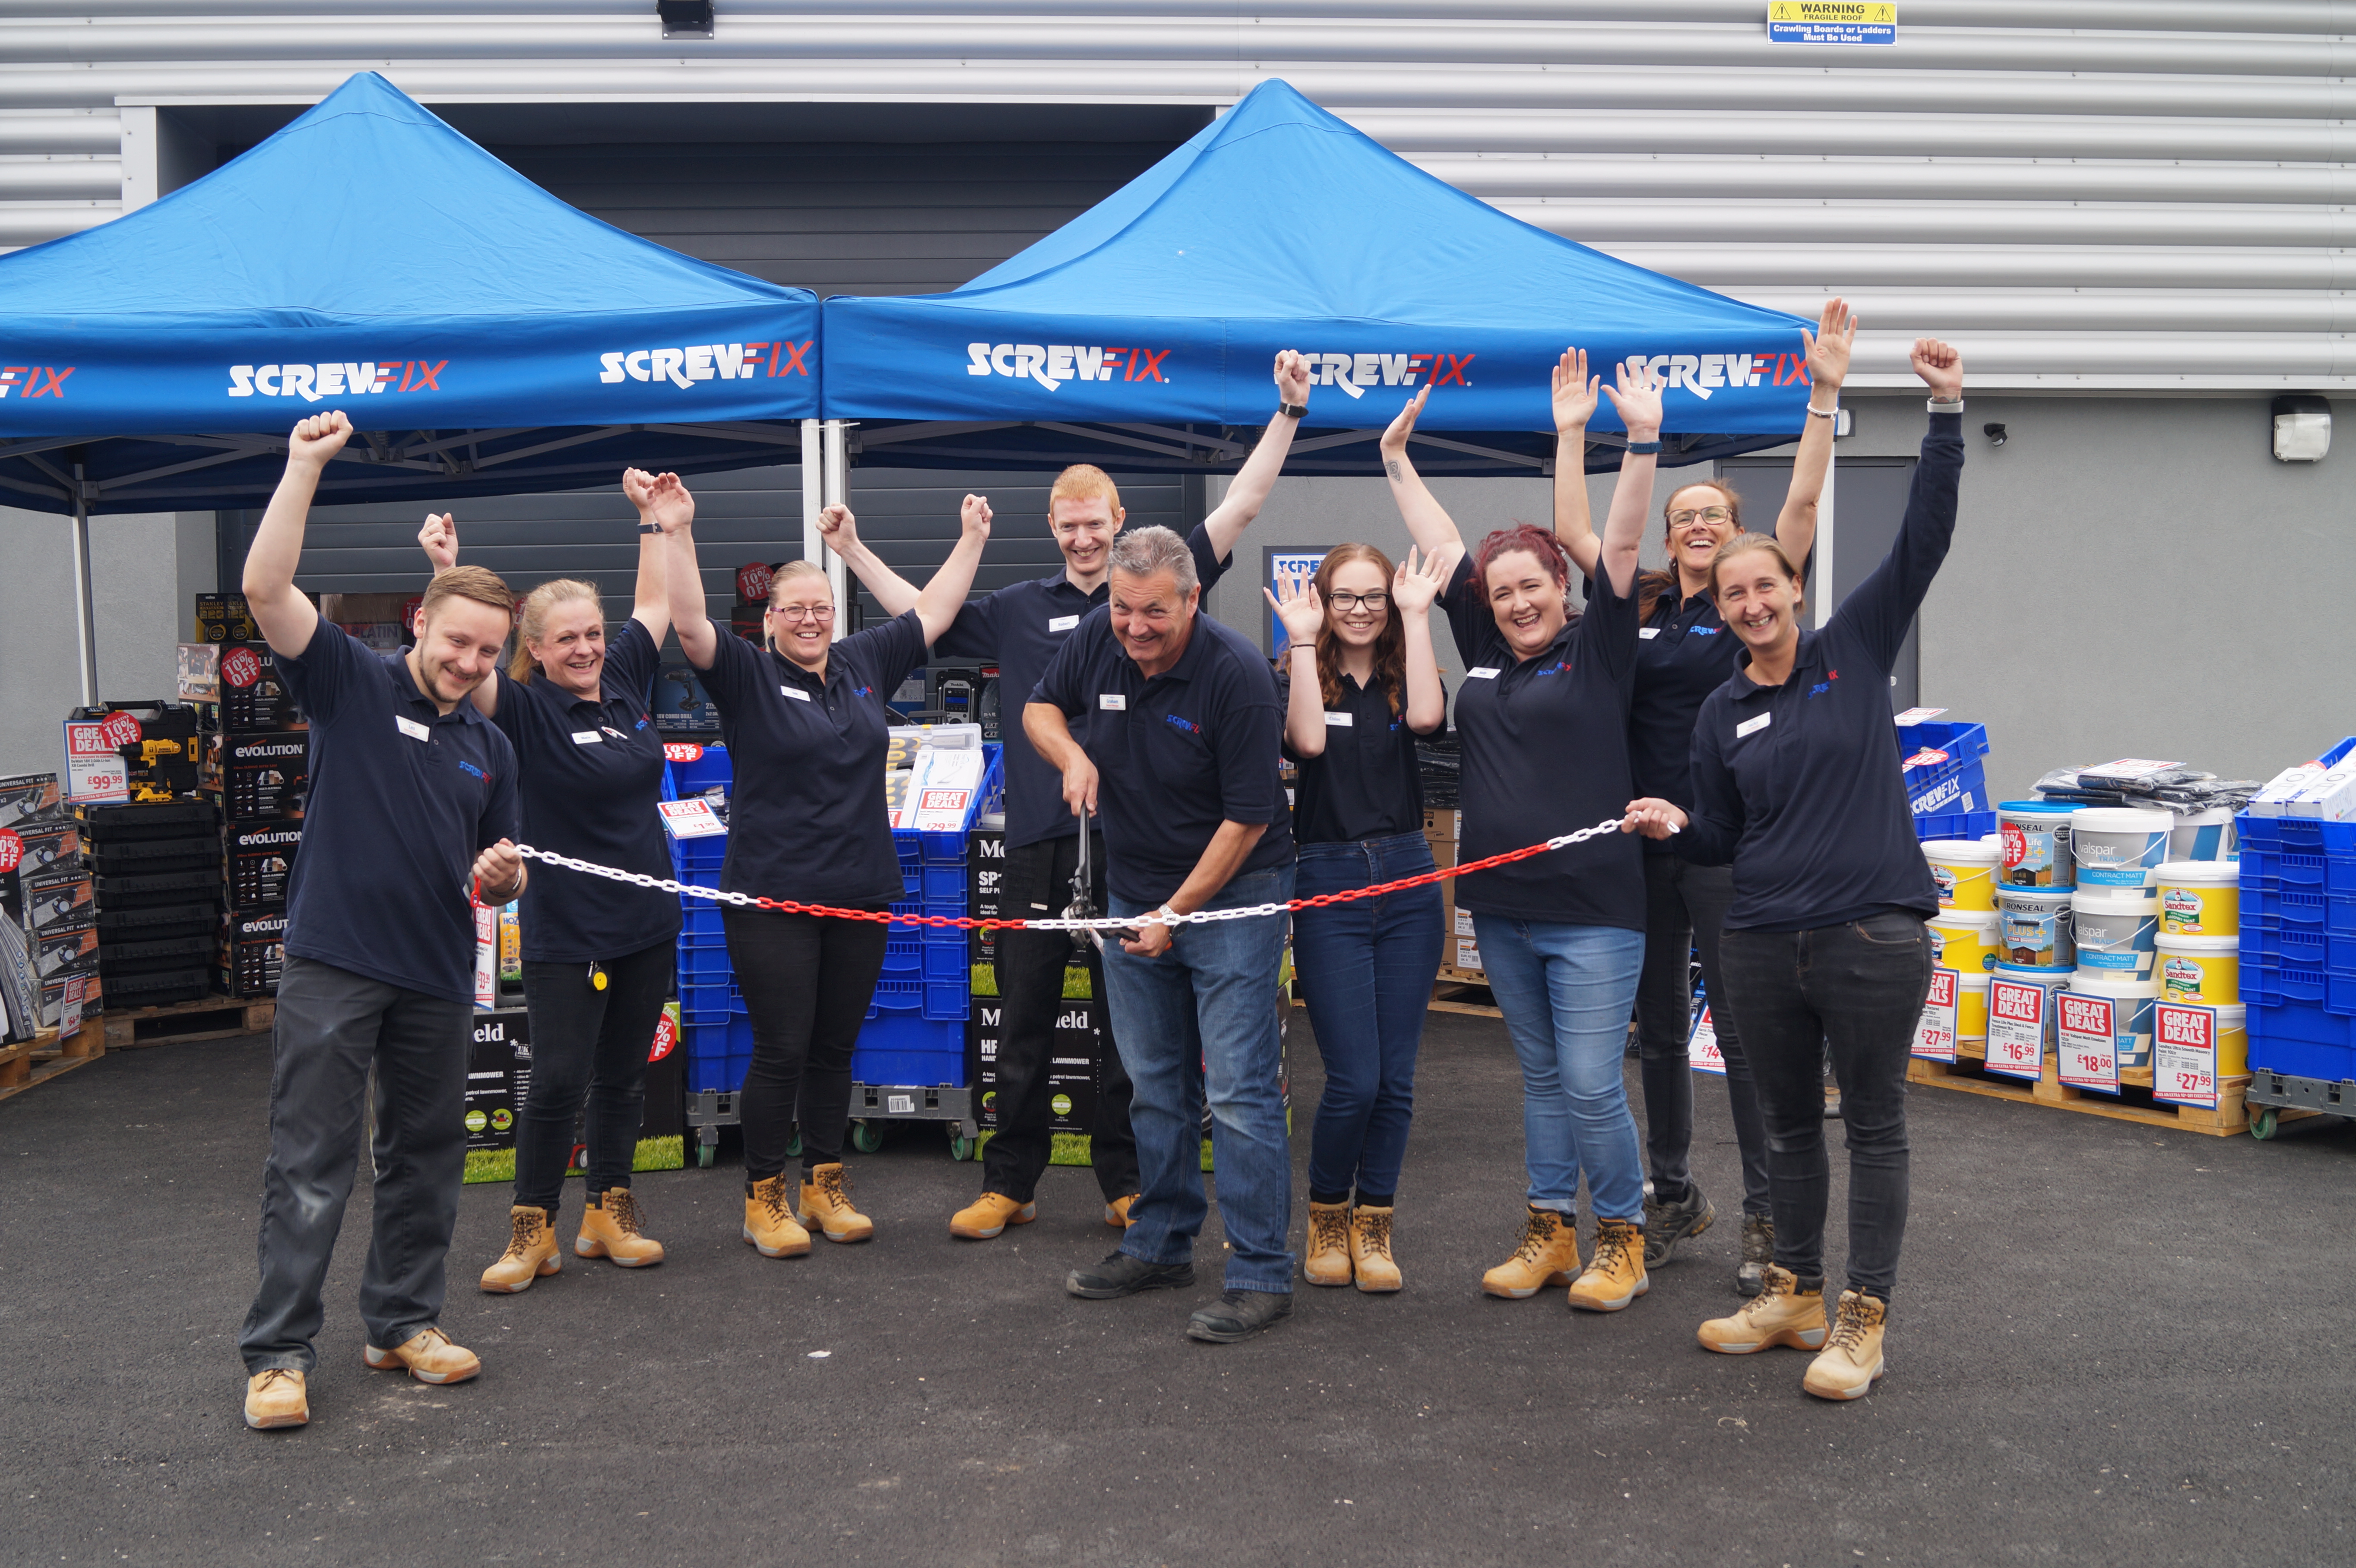 Thornabys’ First Screwfix Store is Declared a Runaway Success